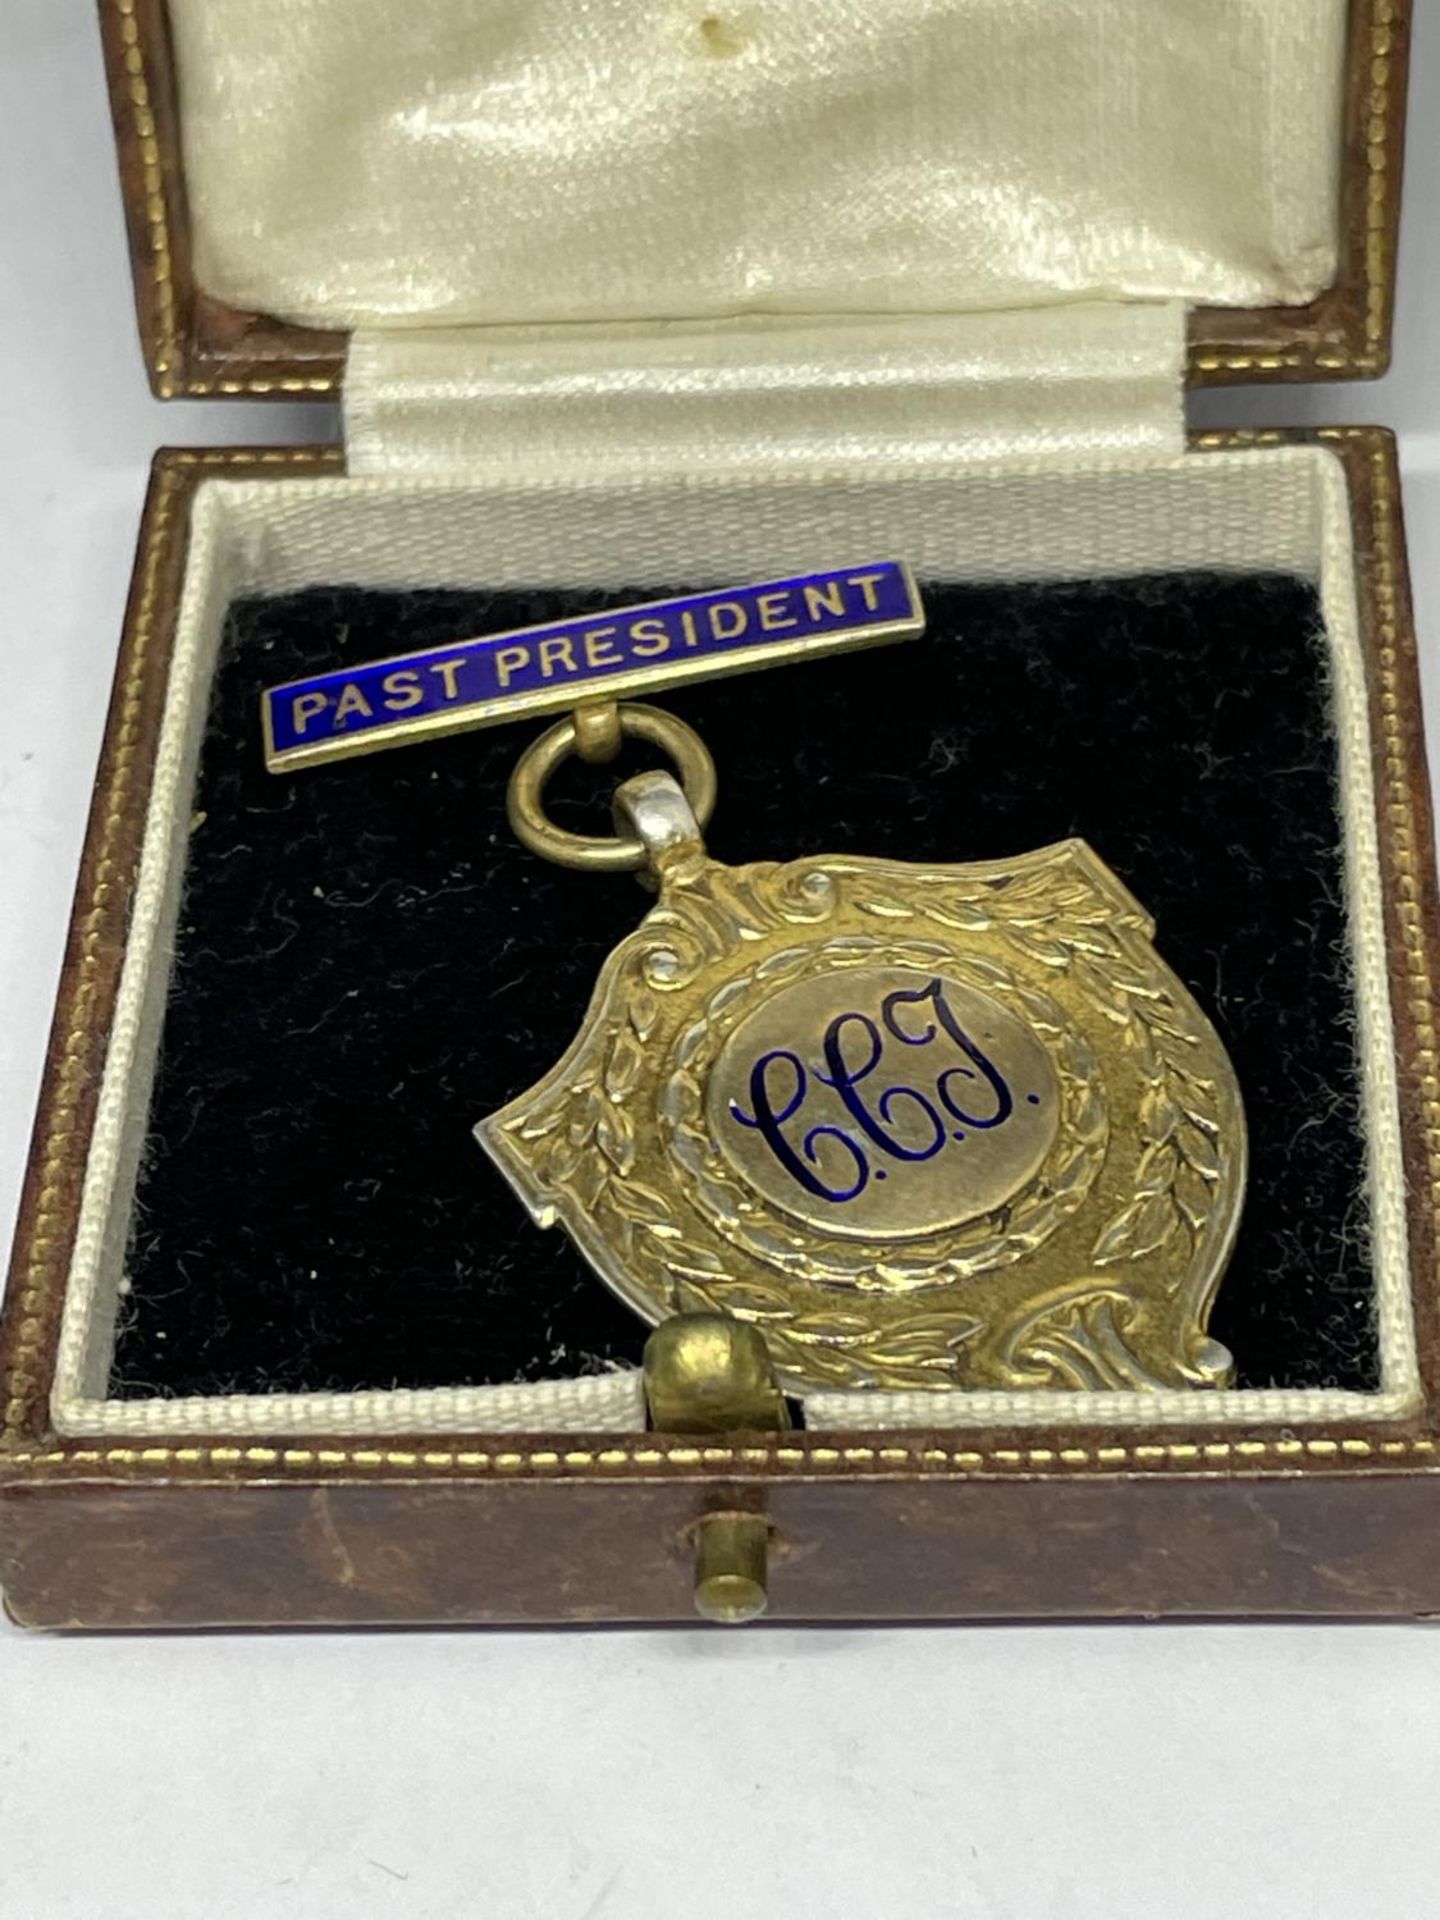 A HALLMARKED BIRMINGHAM SILVER PAST PRESIDENT MEDAL IN A PRESENTATION BOX - Image 6 of 6